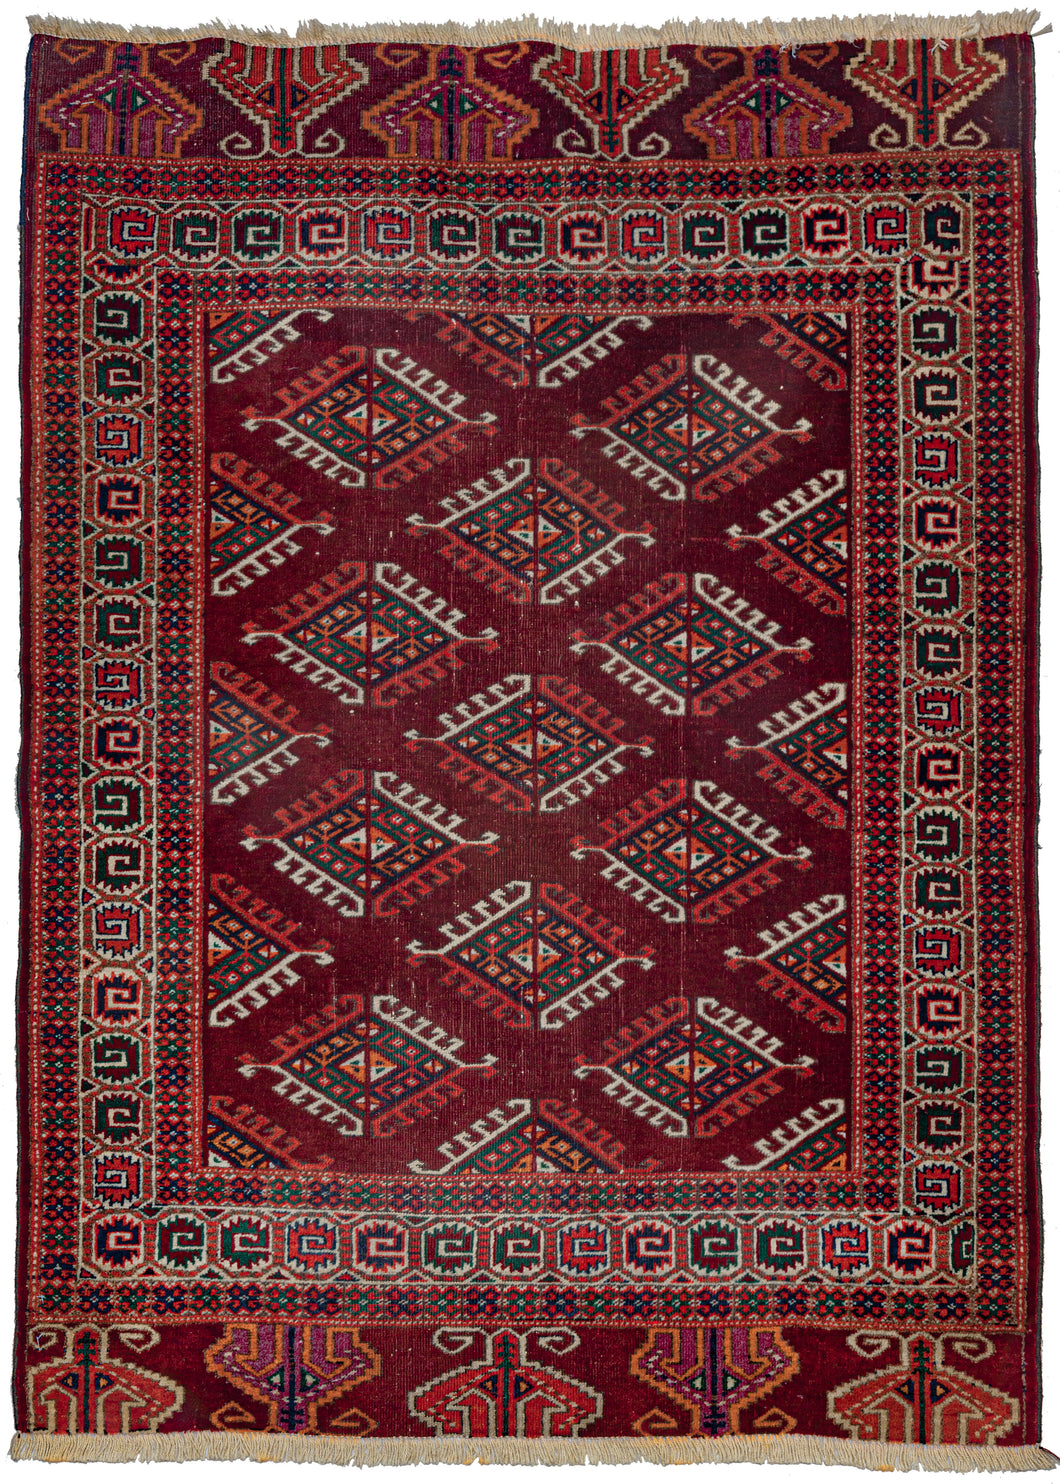 This Midcentury Yomud Turkmen Rug features an allover 